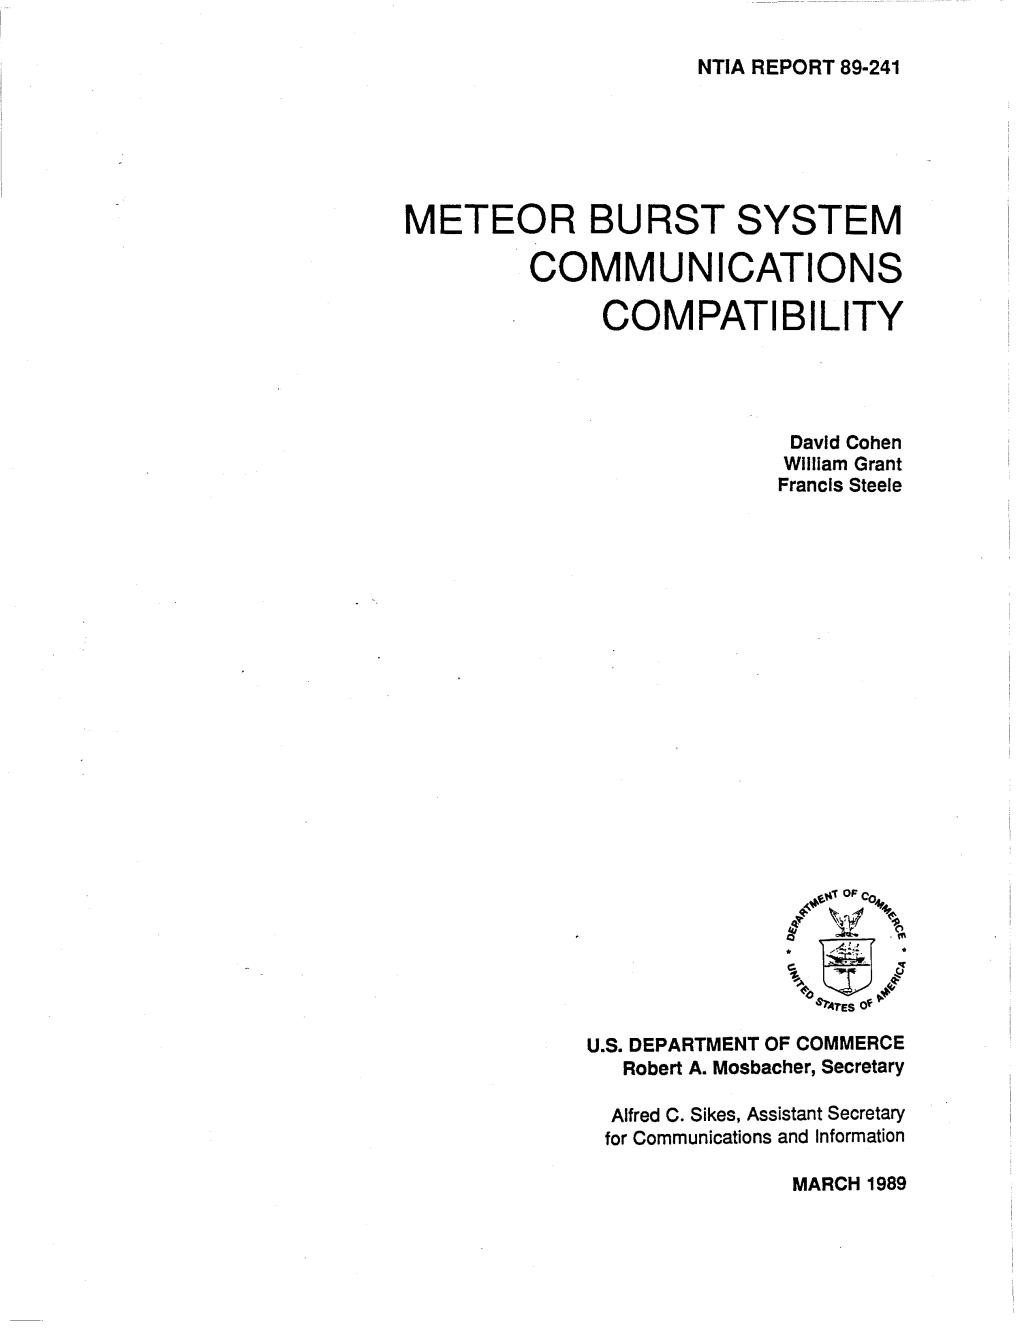 NTIA Technical Report TR-89-241 Meteor–Burst System Communications Compatibility